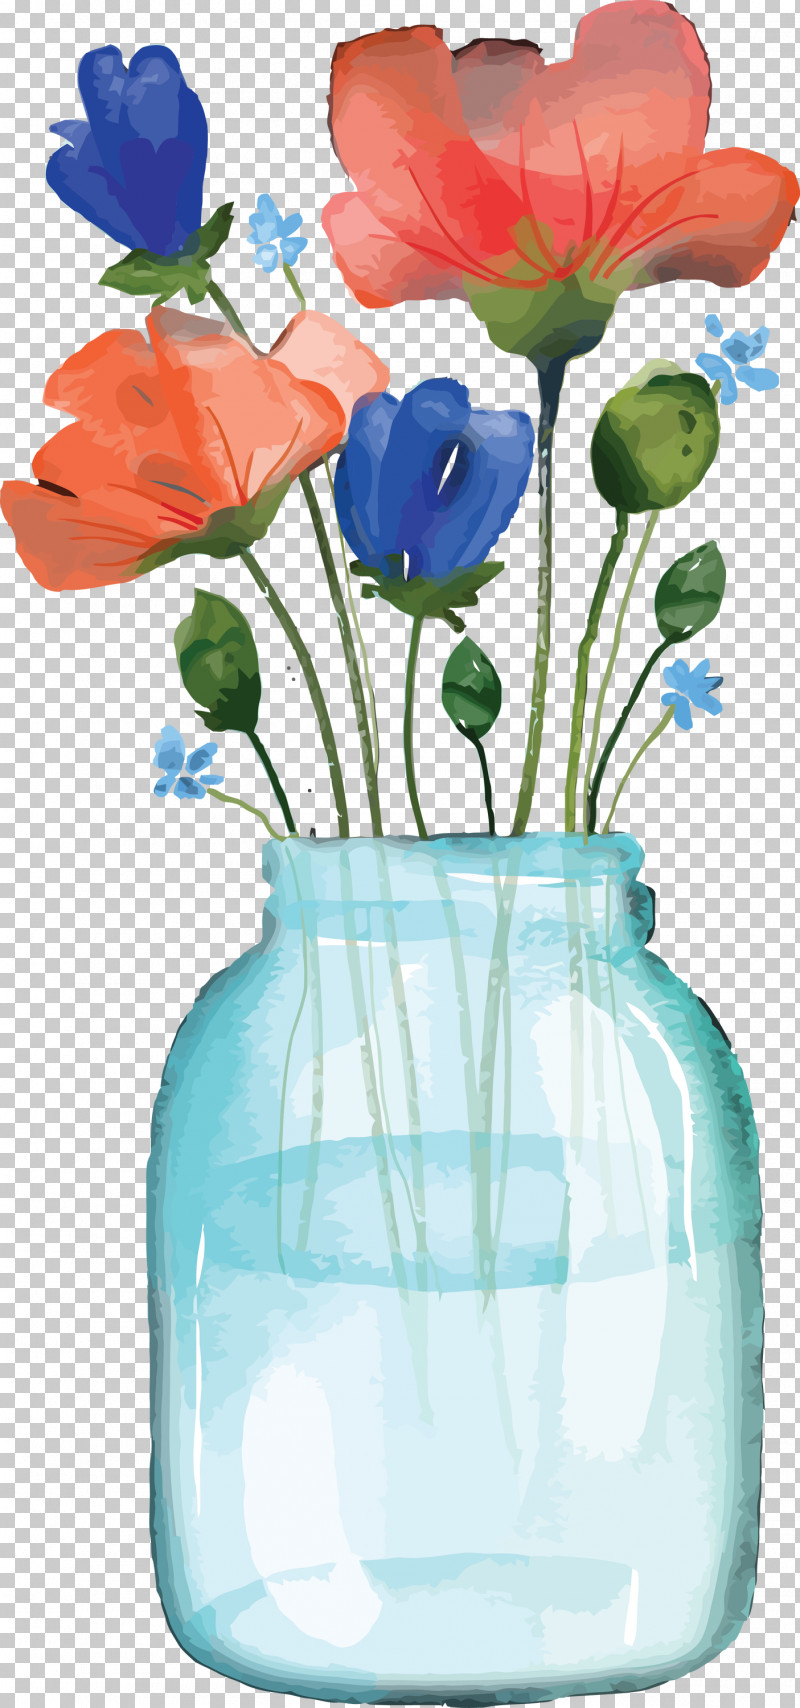 Vase Flower Cut Flowers Turquoise Plant PNG, Clipart, Artifact, Cut Flowers, Flower, Flowerpot, Petal Free PNG Download